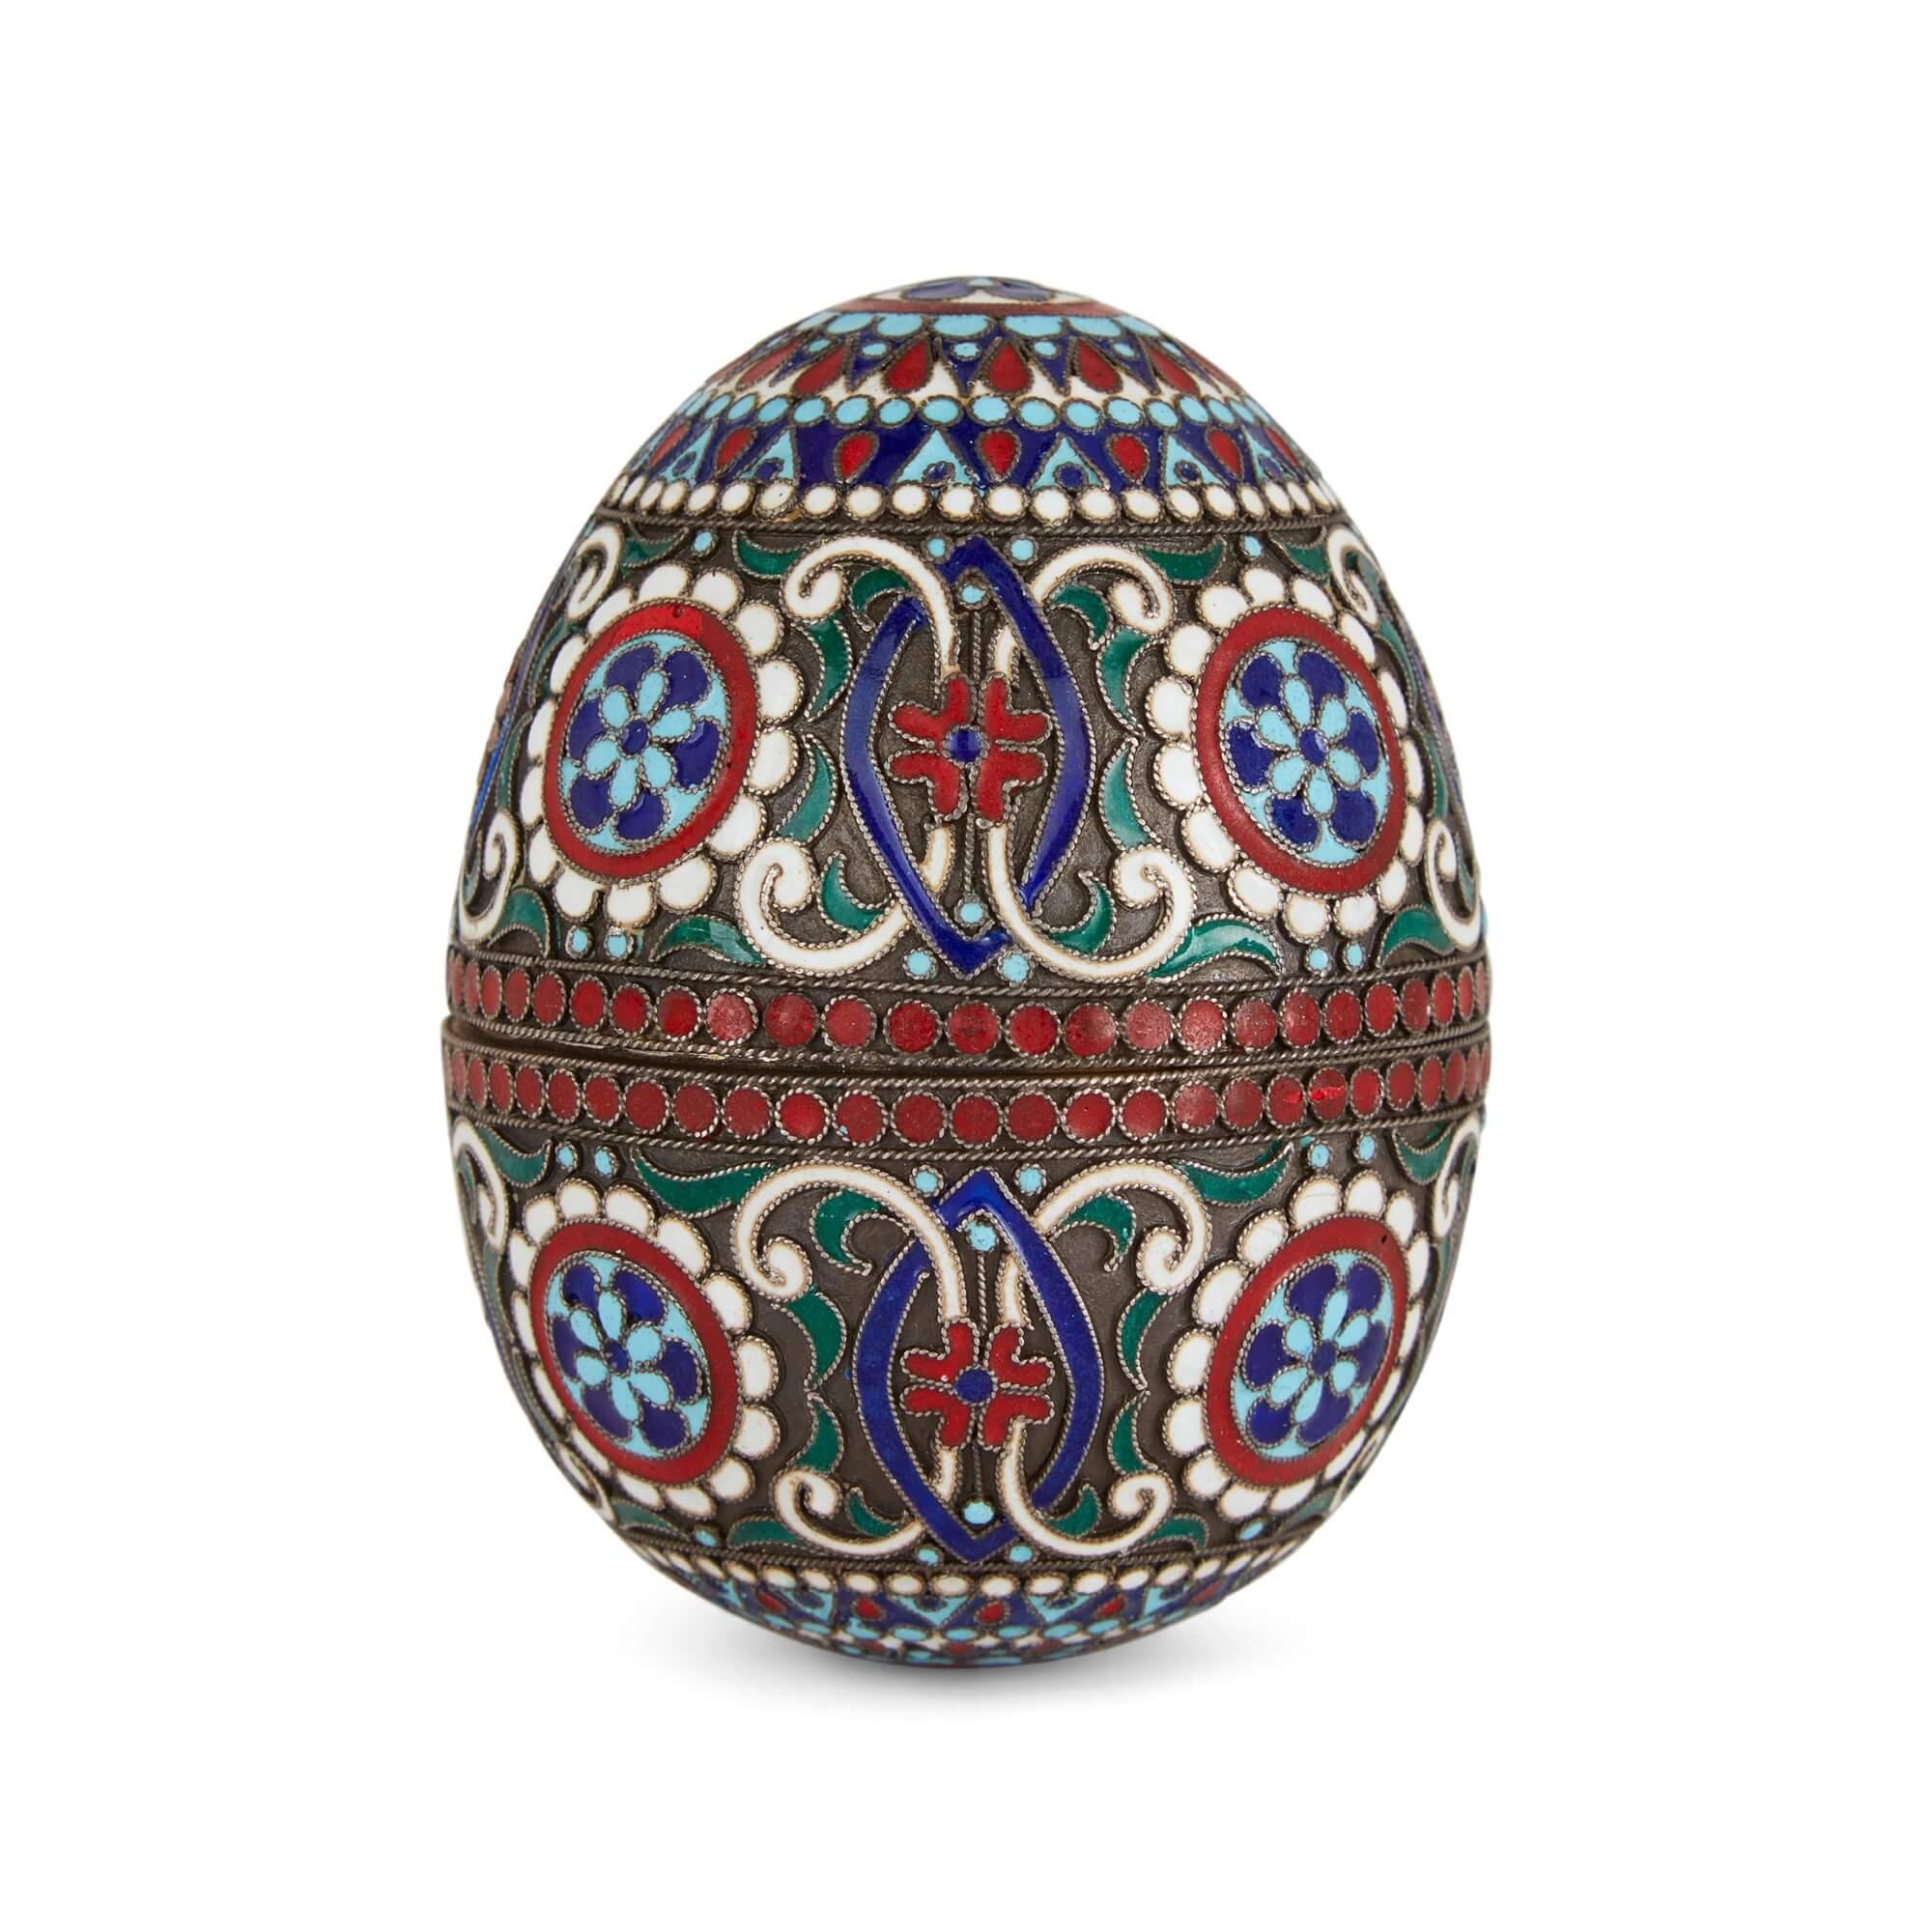 Russian cloisonné enamel and silver gilt egg
Russian, 20th Century
Height 7cm, diameter 5cm

The complex technique of cloisonné enamelling is expertly employed on this delicate Russian egg. 

Decoration includes scrolling motifs, flowers, and bands